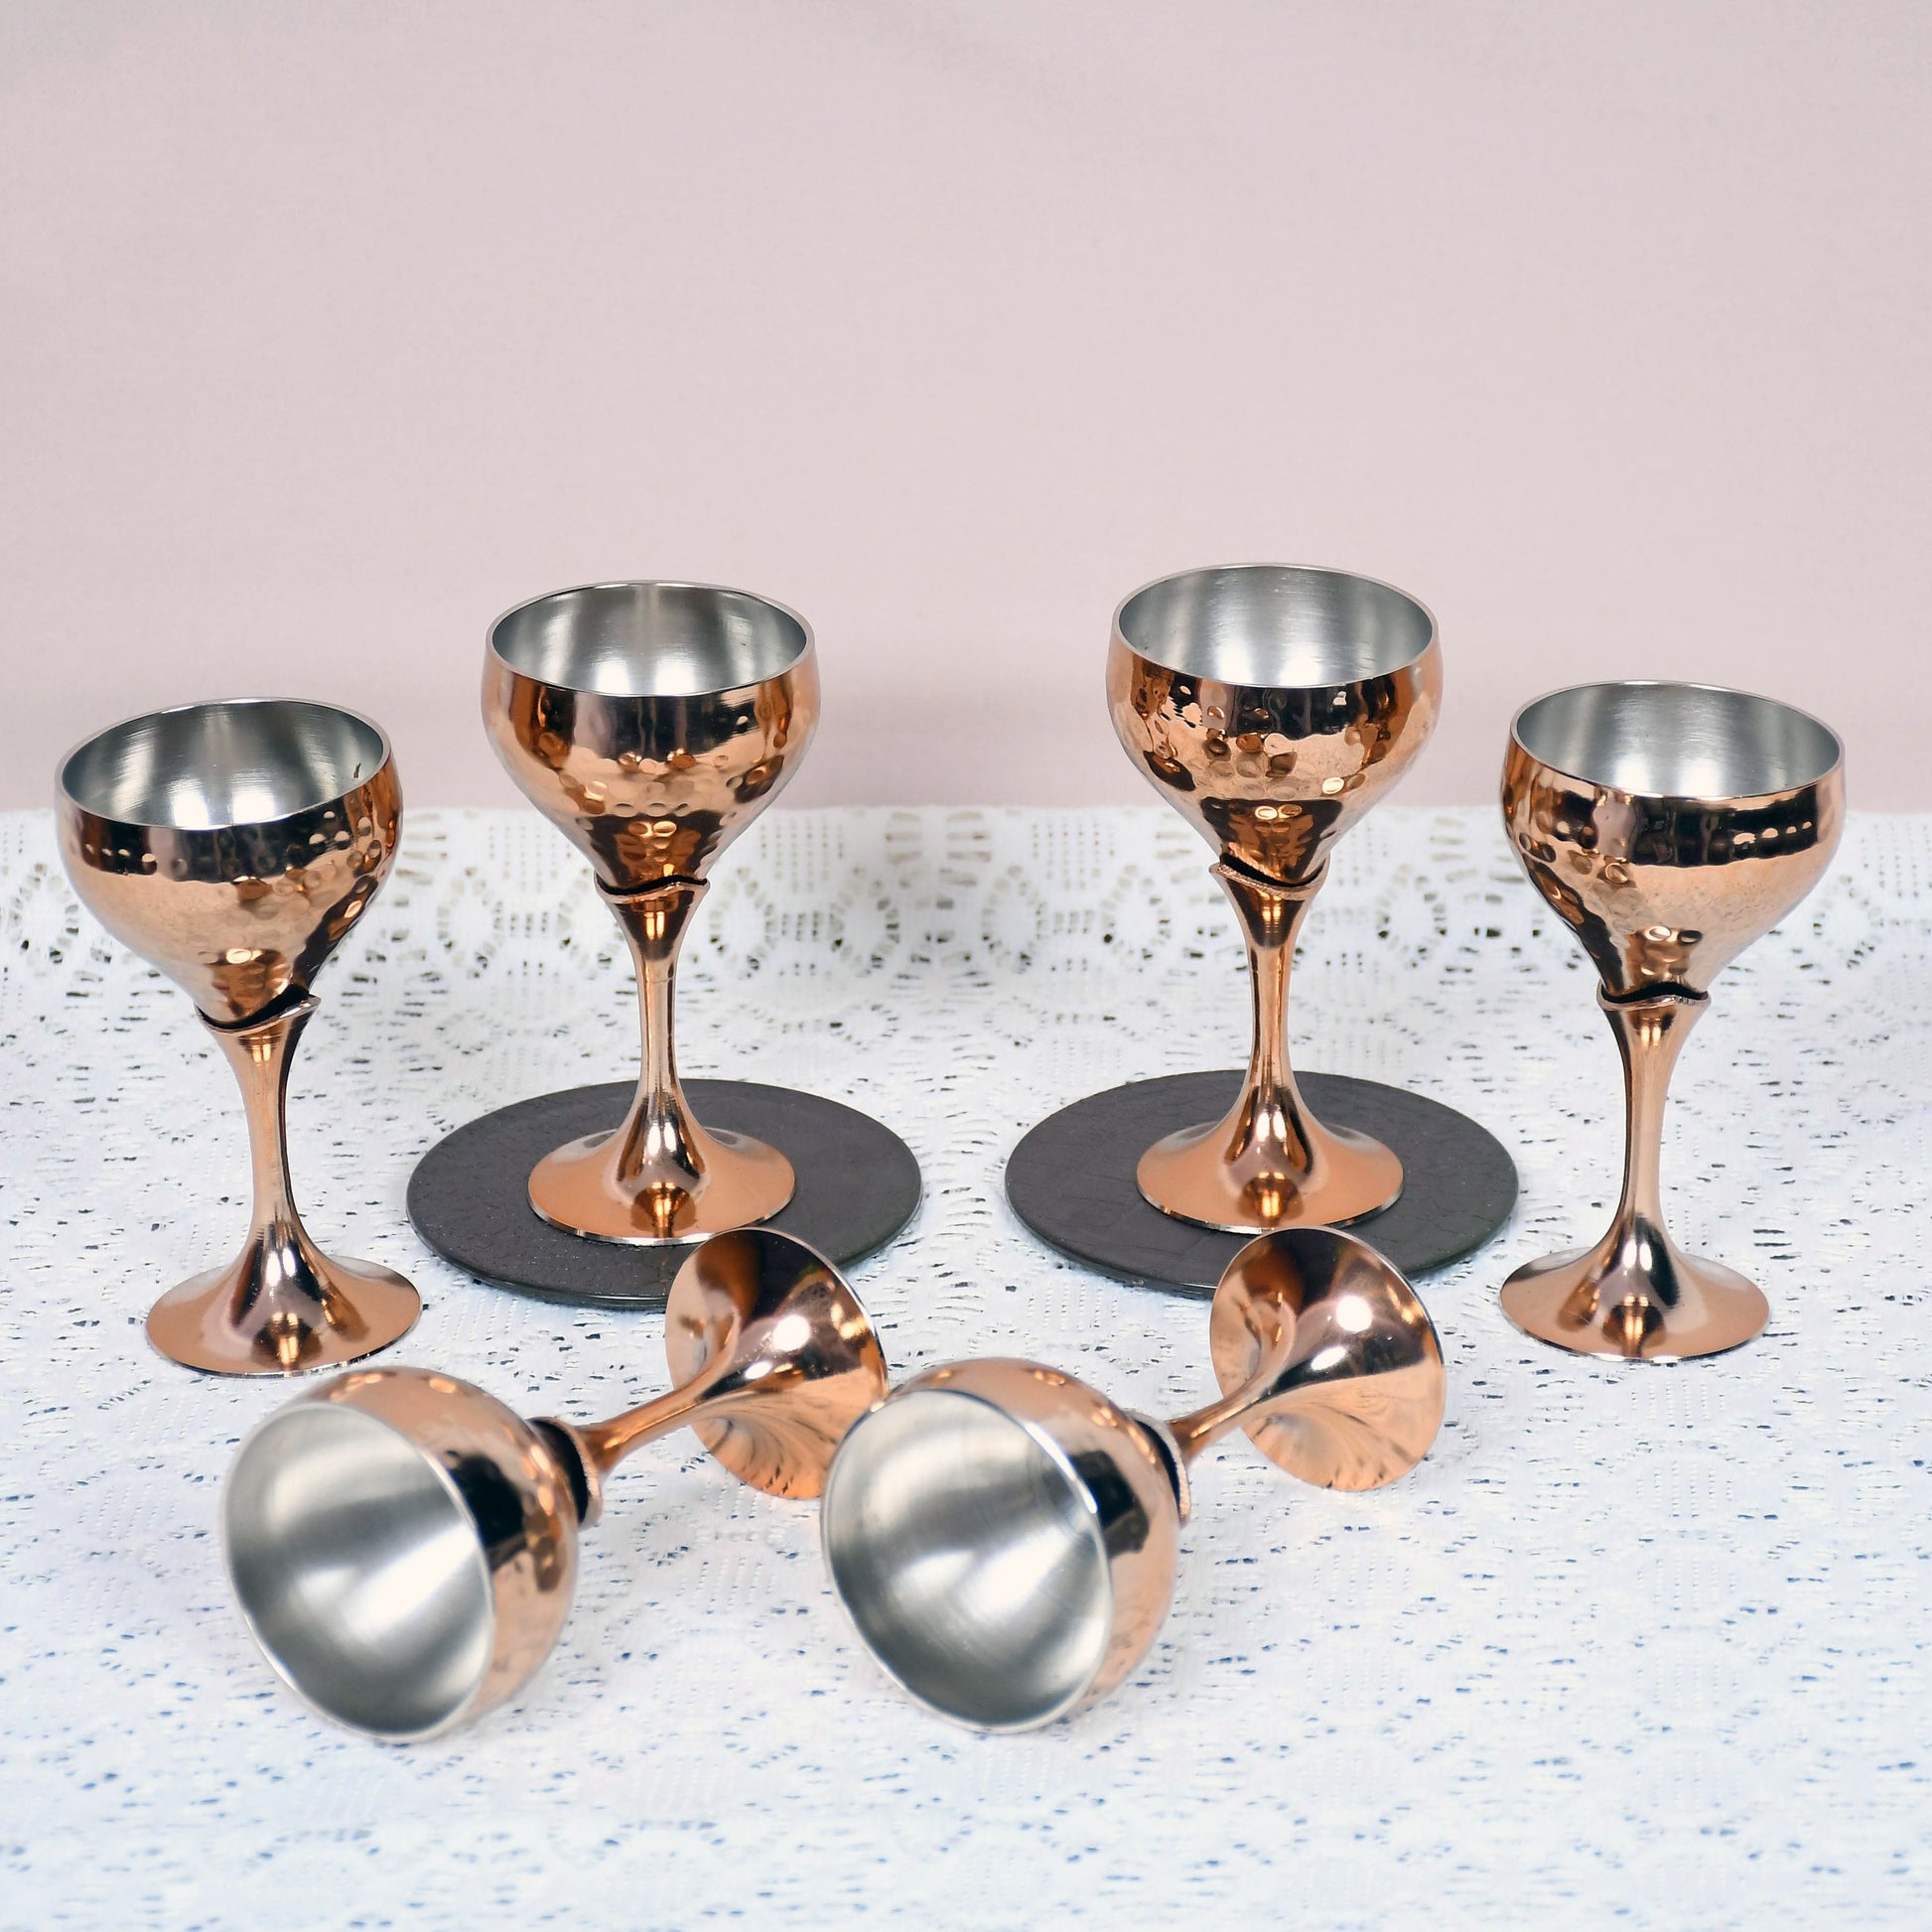 SAMA Homes - beautifully designed pure copper round tequila glass set of 6 with wooden box